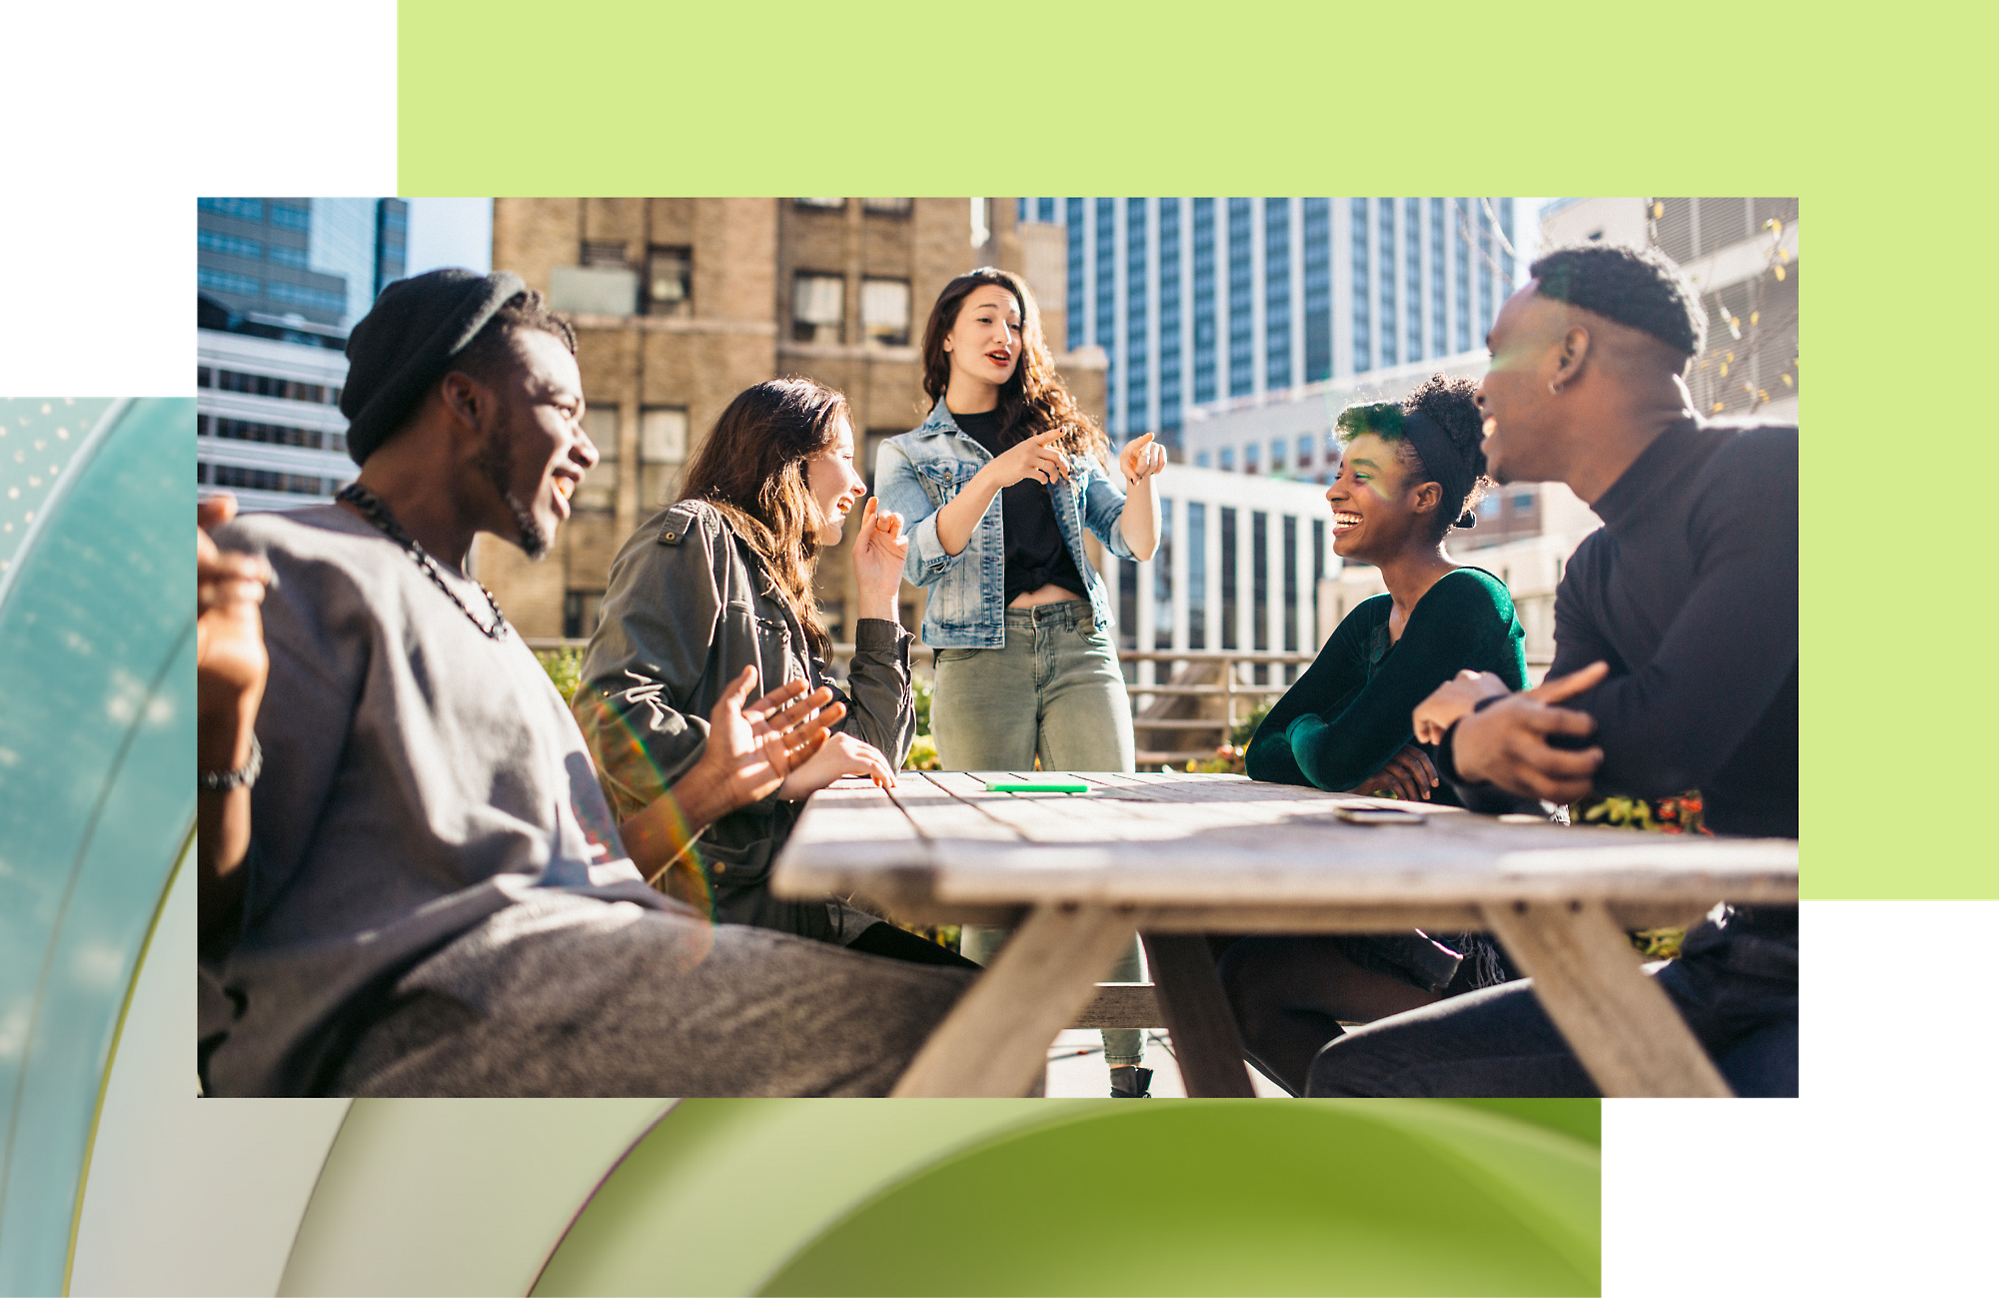 A diverse group of young adults enjoying a lively discussion around a table outdoors in a sunny urban setting.